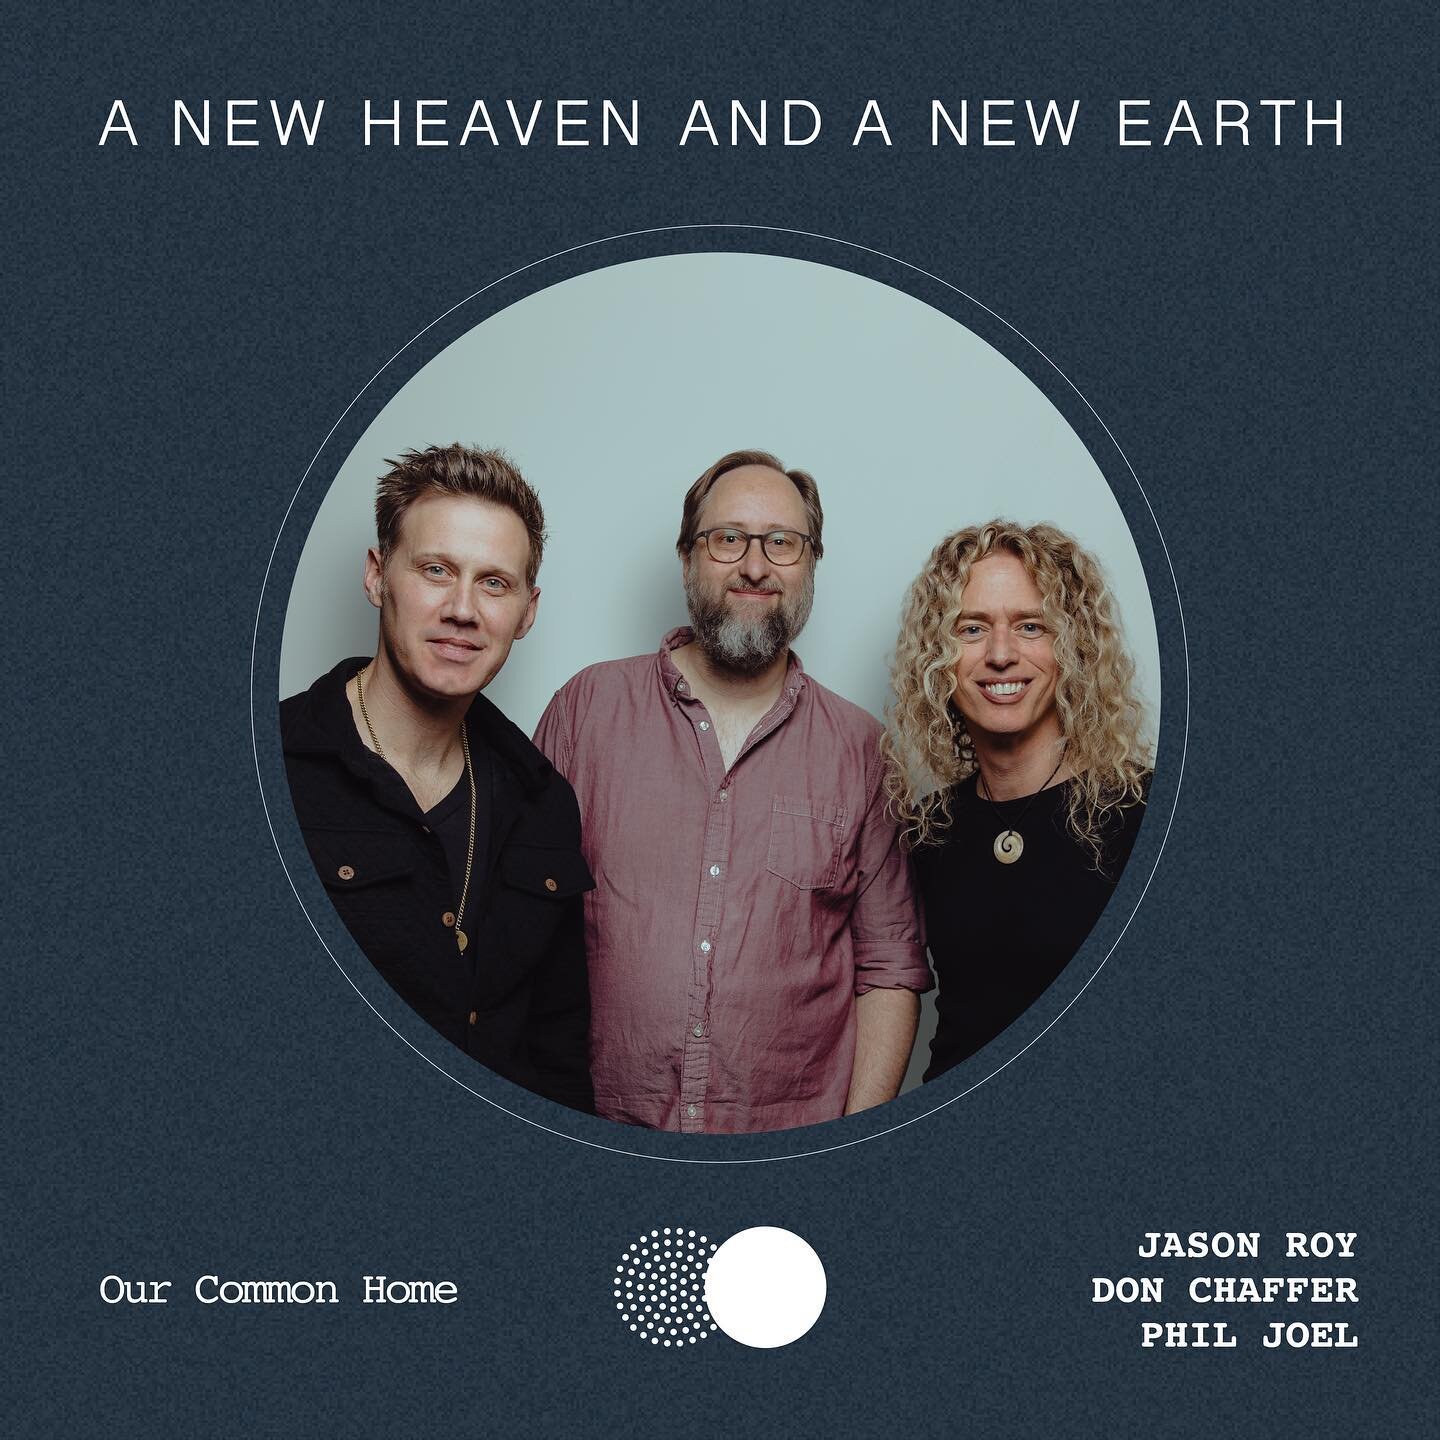 Our Common Home is out today! Featuring @donchaffer @philjoelofficial @jroymusic, it&rsquo;s inspired by Pope Francis&rsquo;s letter &ldquo;to all people living on this planet&rdquo; (called Laudato Si&rsquo;: On Care for our Common Home). Link in bi